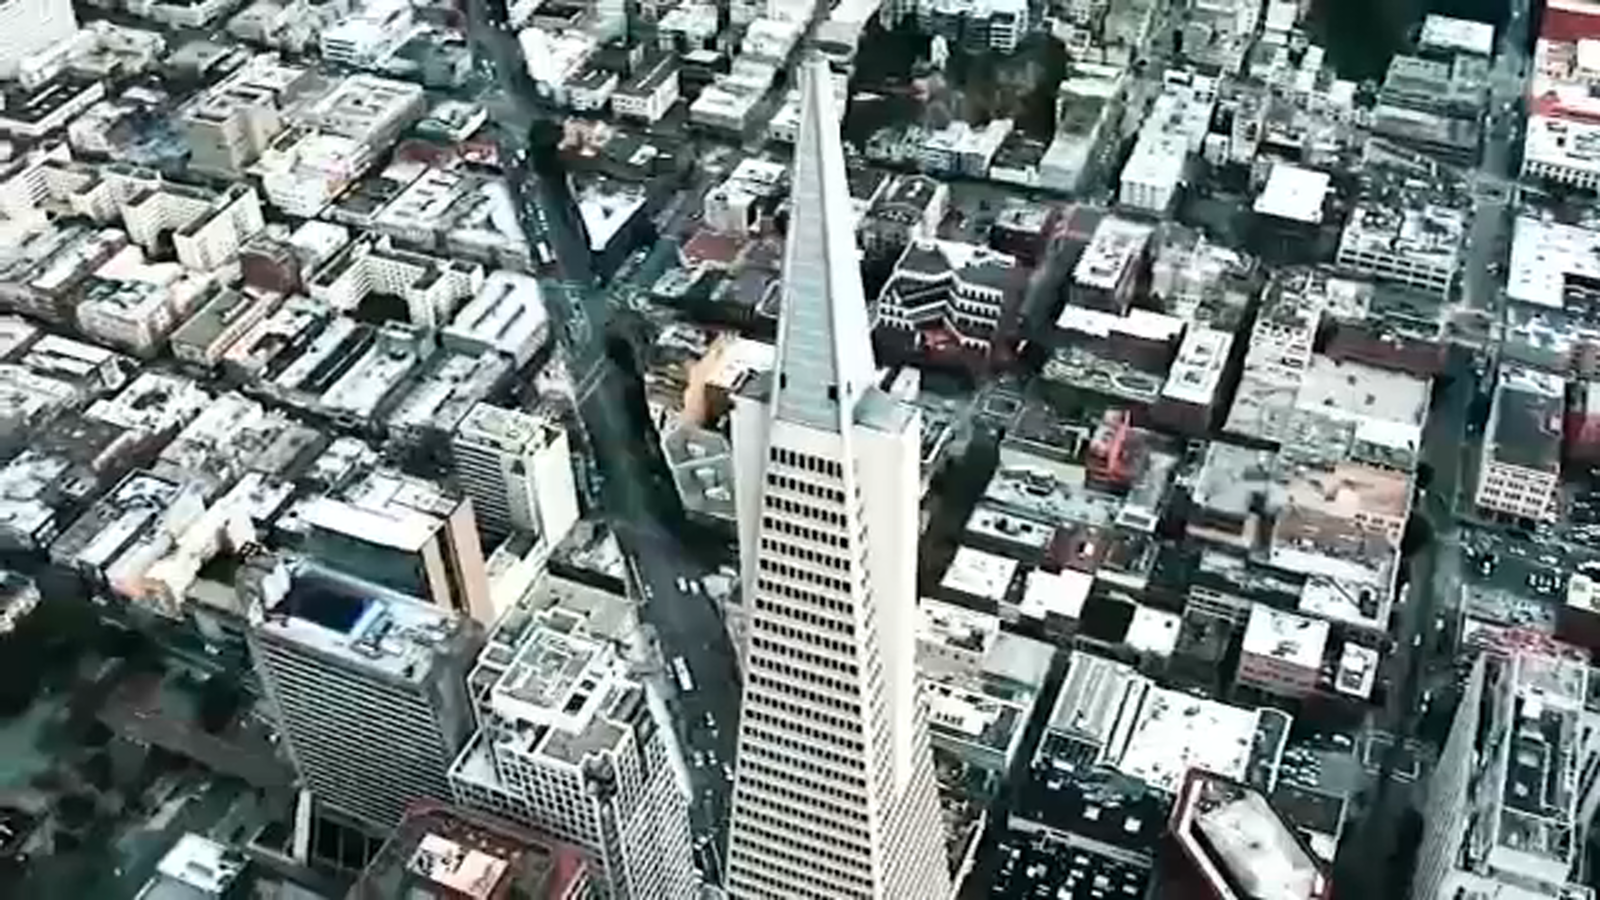 Transamerica Pyramid illuminated? Here's a look at ongoing renovations to iconic SF skyscraper